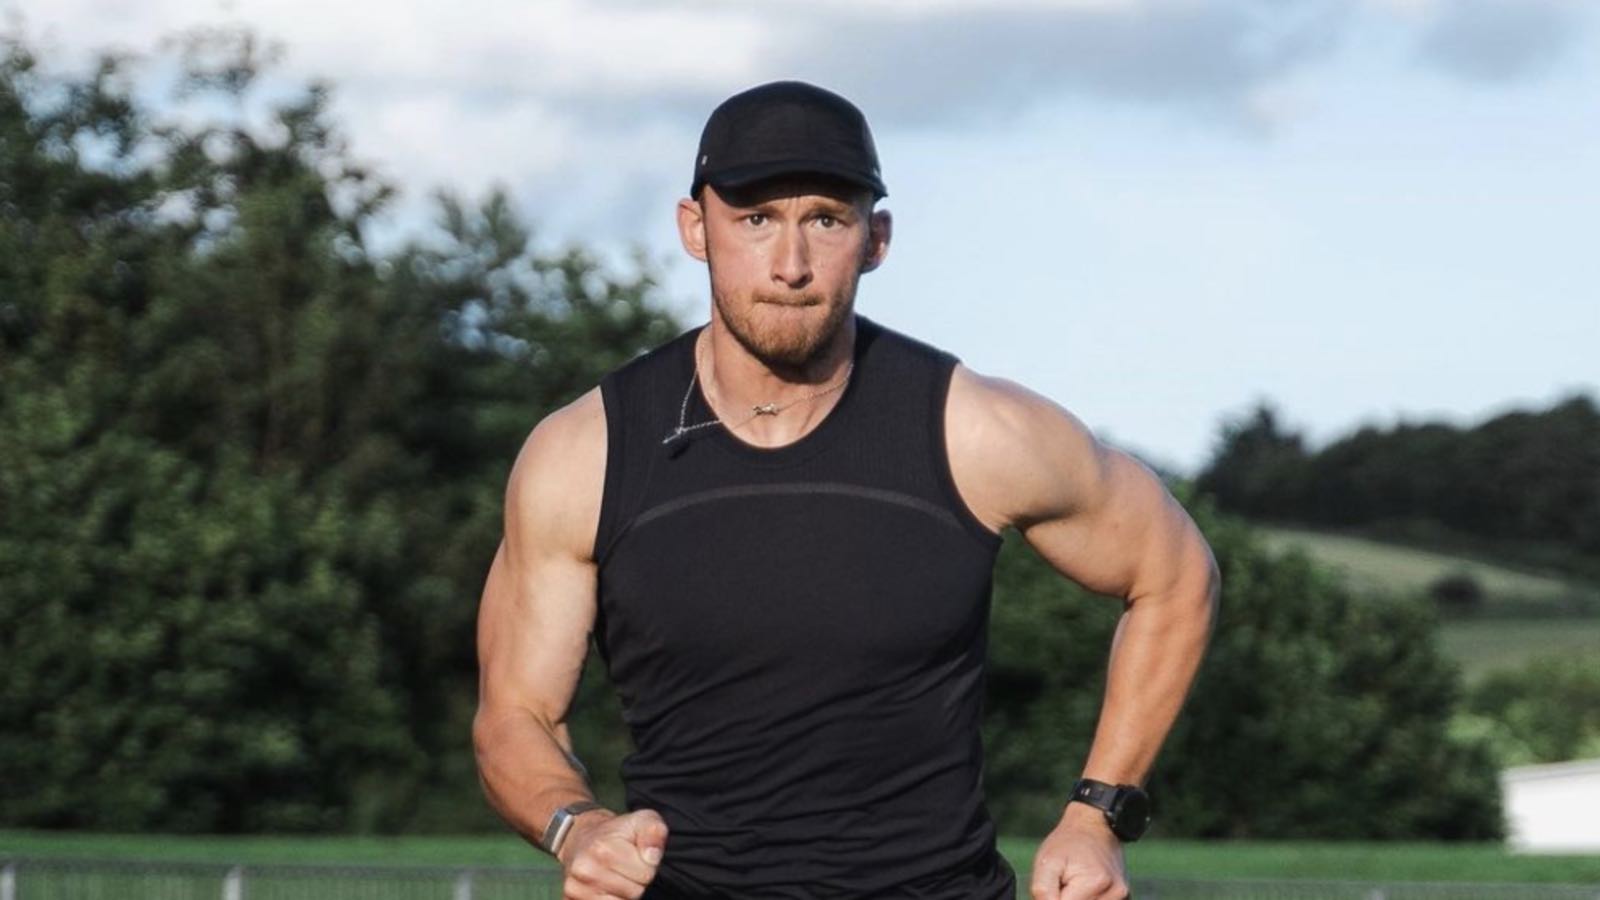 fergus-crawley-shares-5-tips-for-running-a-better-5k-–-breaking-muscle